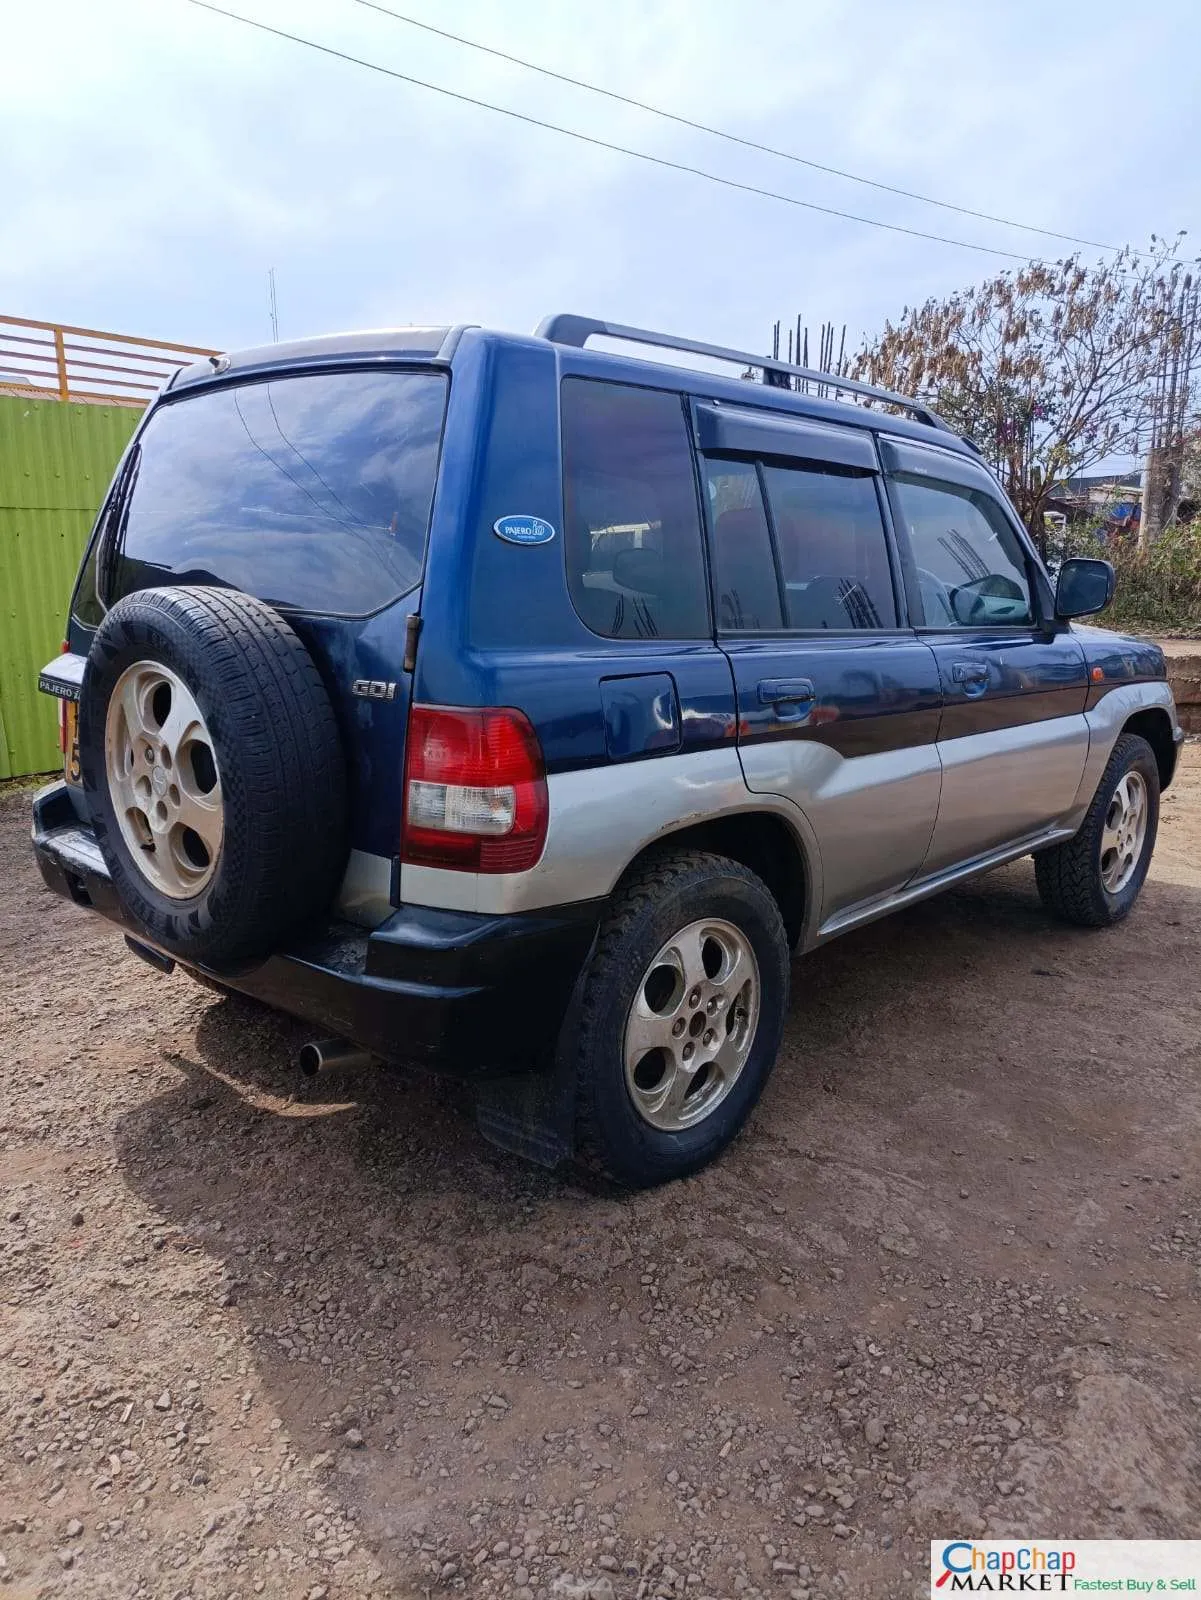 Mitsubishi Pajero IO for sale in Kenya 🔥 You Pay 30% Deposit Trade in Ok Hot Deal (SOLD)